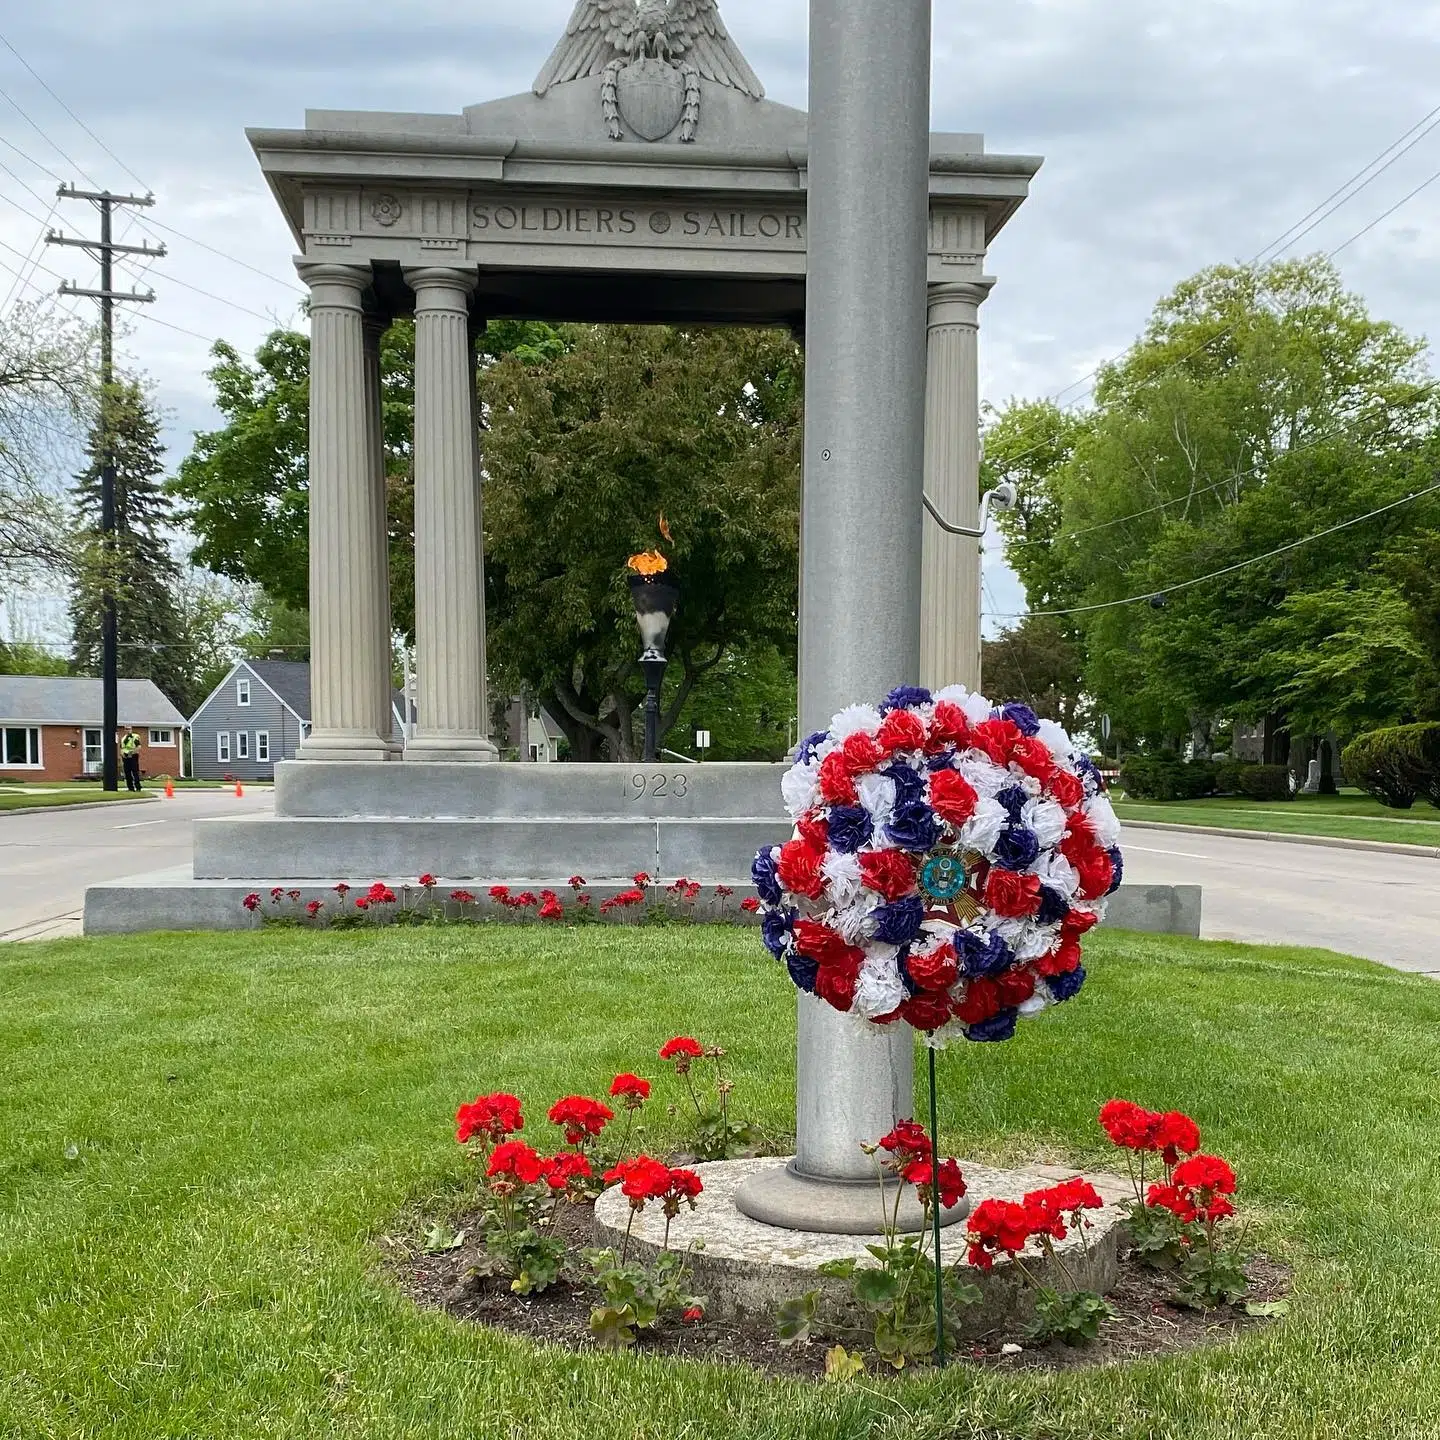 Manitowoc Observes and Celebrates Memorial Day